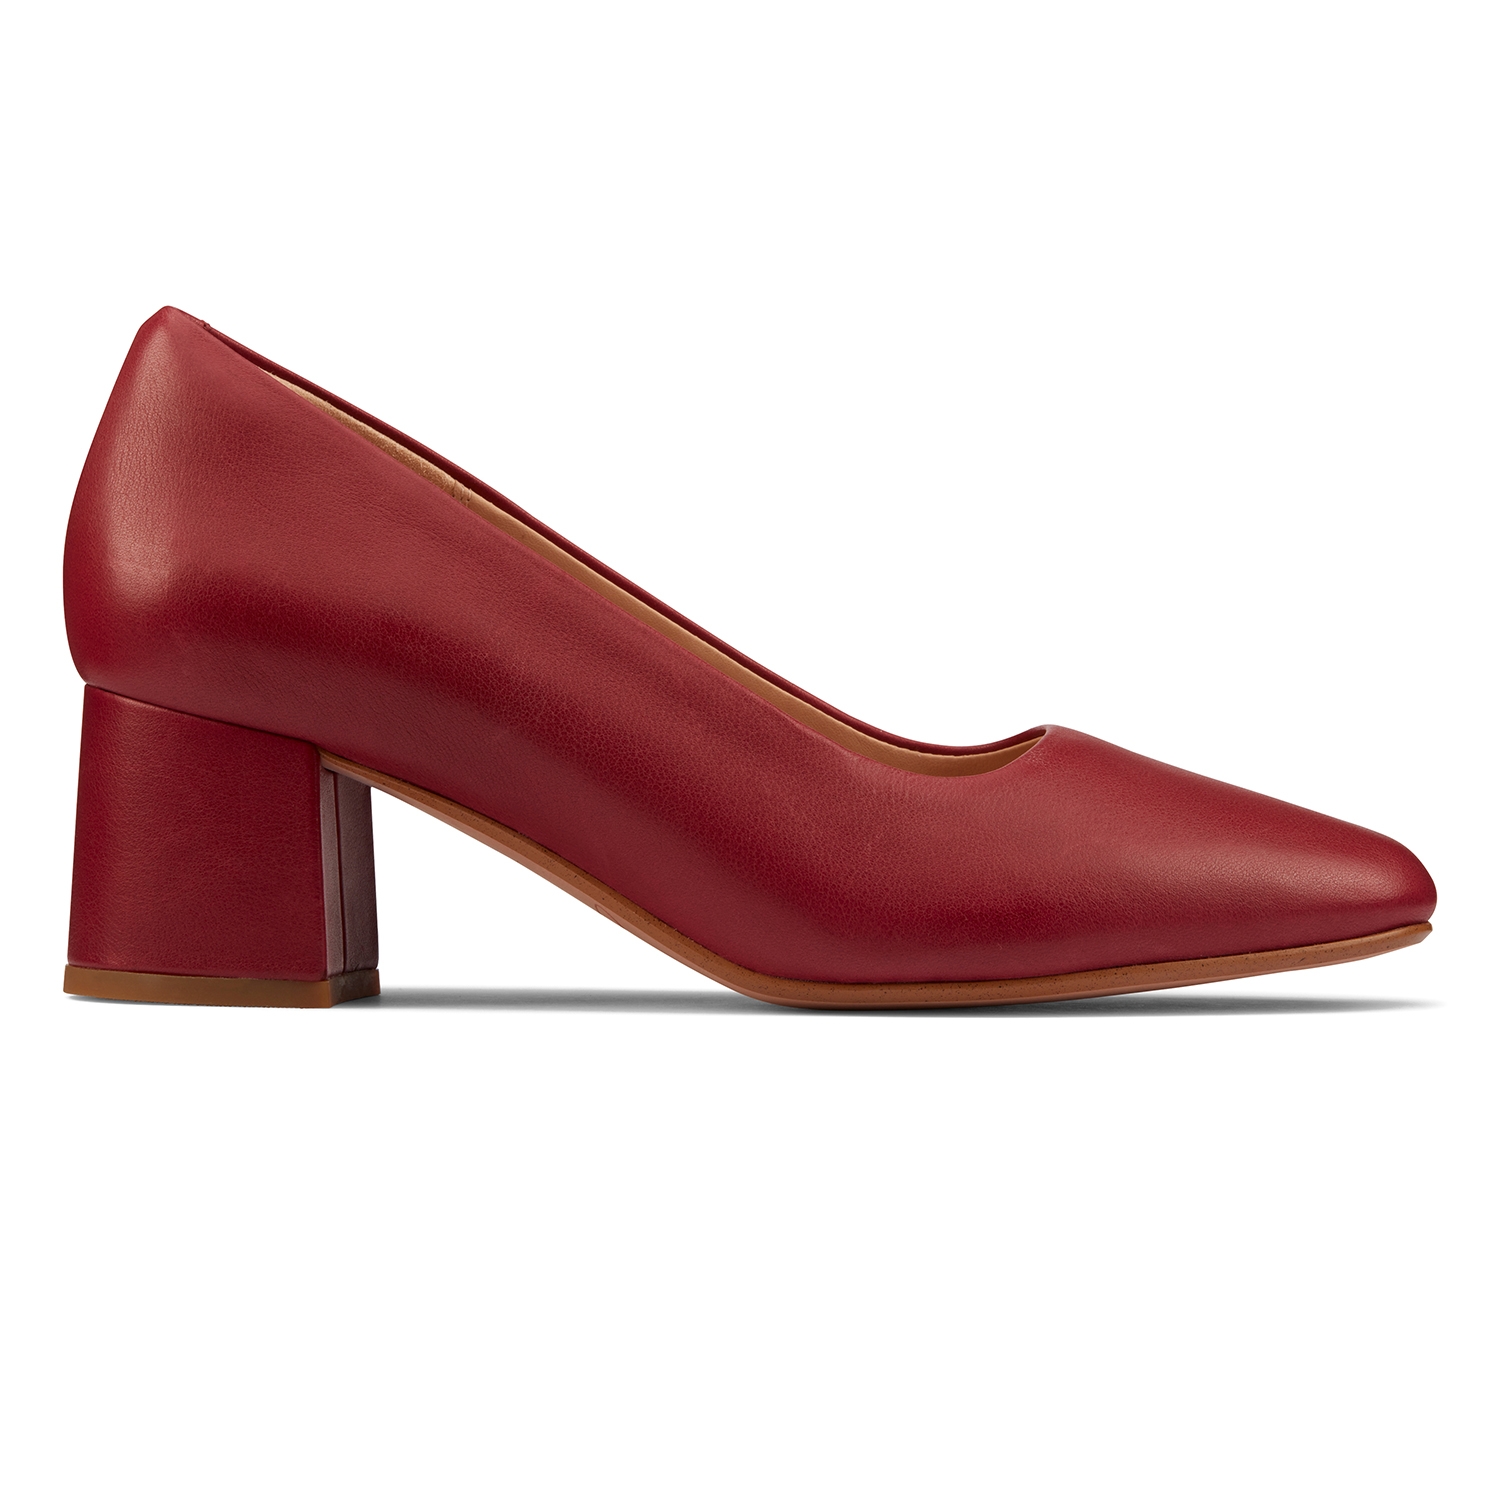 Clarks | Sheer55 Court Wine Leather